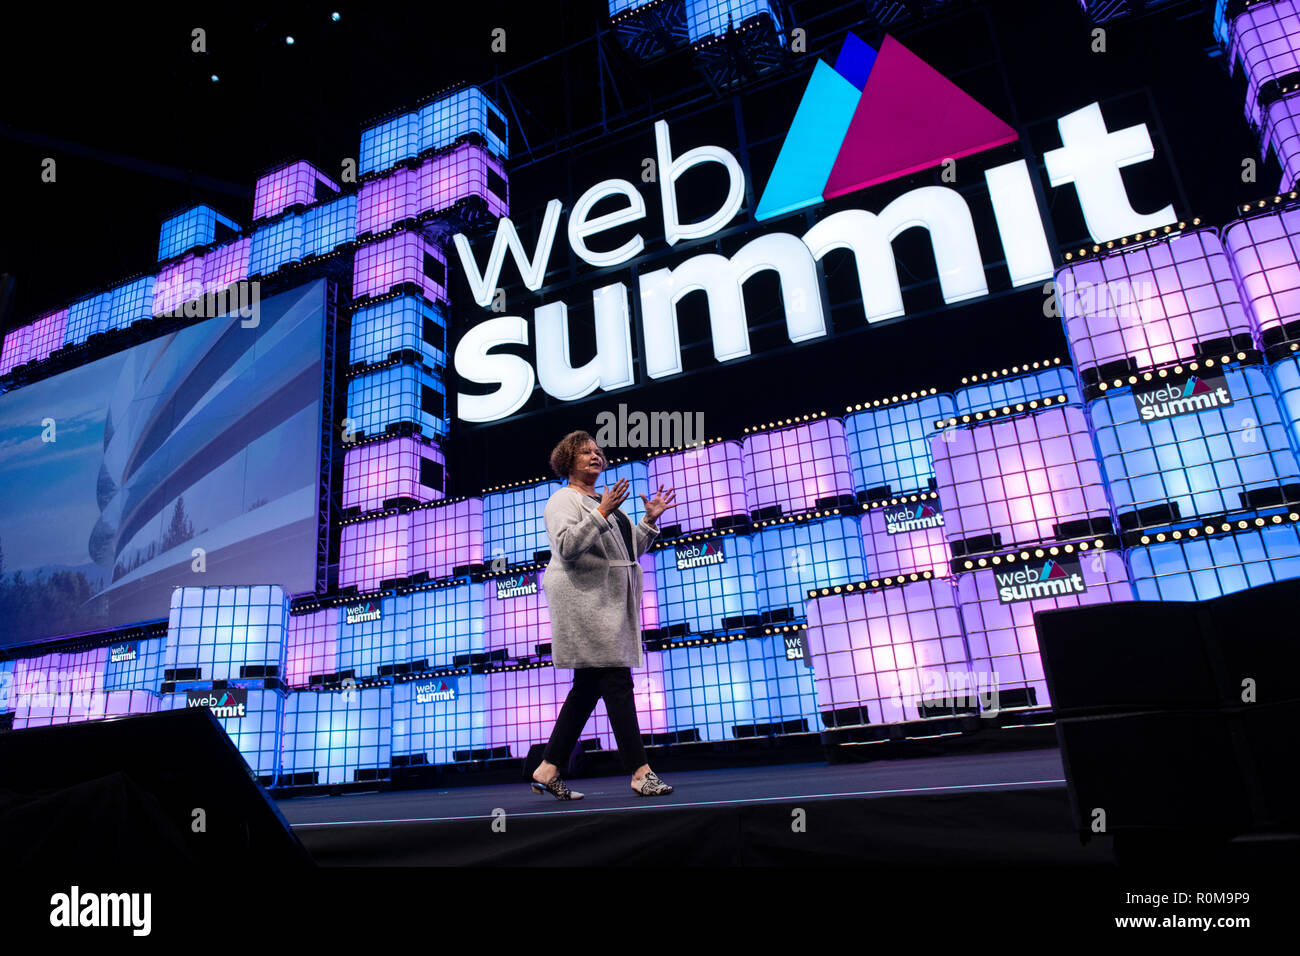 Apple’s Vice President of Environment, Policy and Social Initiatives Lisa Jackson is seen addressing to the audience at Altice Arena Centre Stage during the opening ceremony of the Web Summit 2018.  The 10th edition of the Web Summit has begun in Lisbon. This is one of the largest technology conferences in the world and also a meeting point for the debate on technological evolution in people's lives. This year, around 70.000 participants are expected to attend the Web Summit. Stock Photo